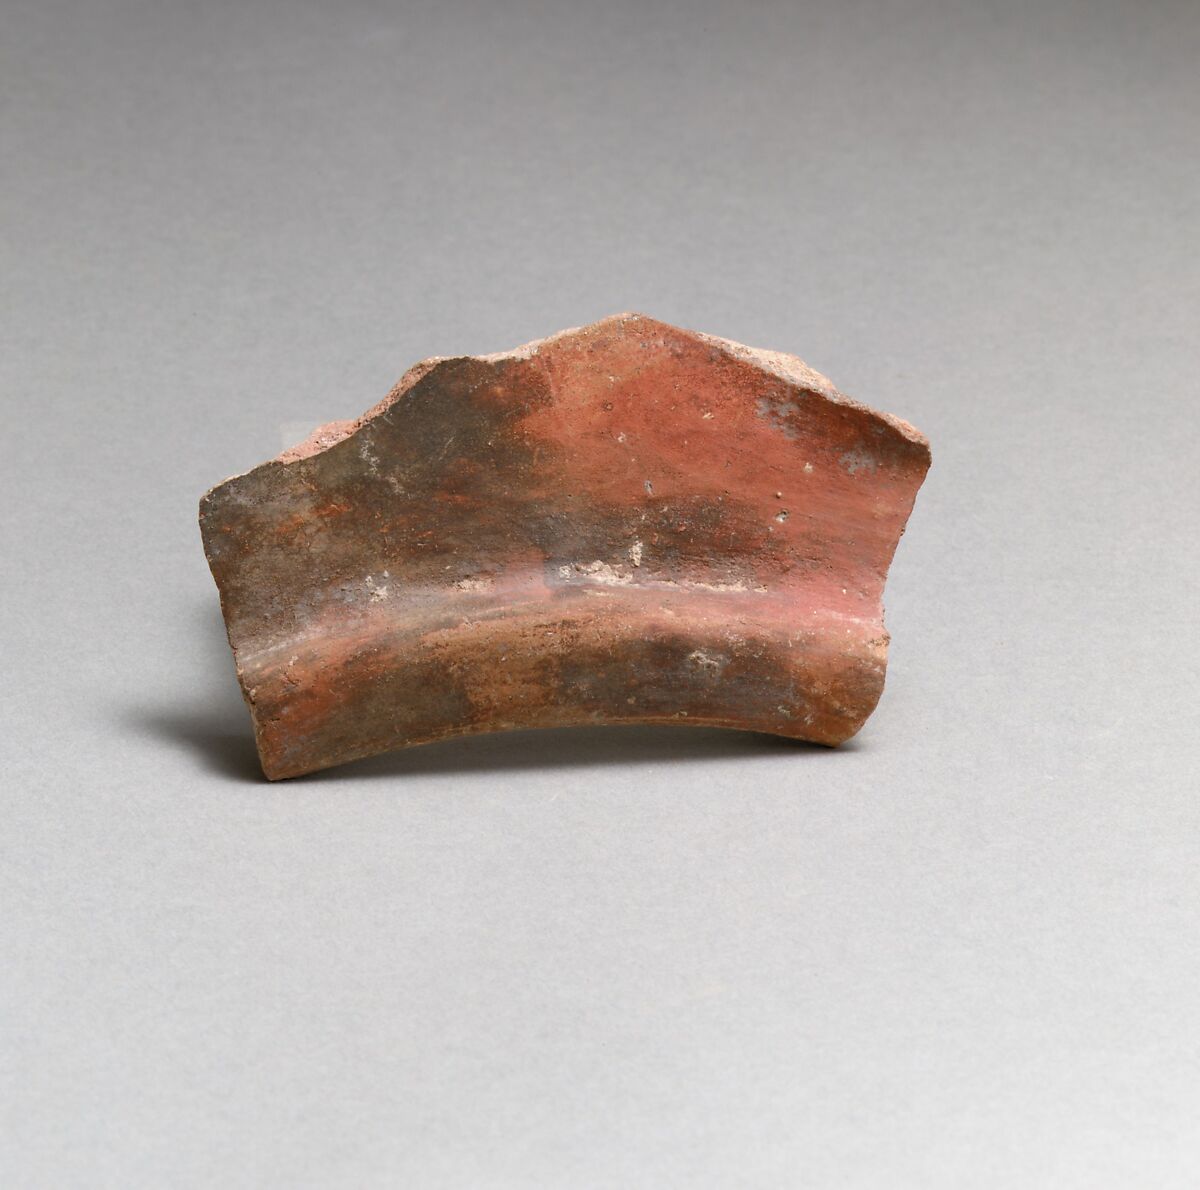 Two terracotta rim fragments from a closed vase, Terracotta, Minoan 